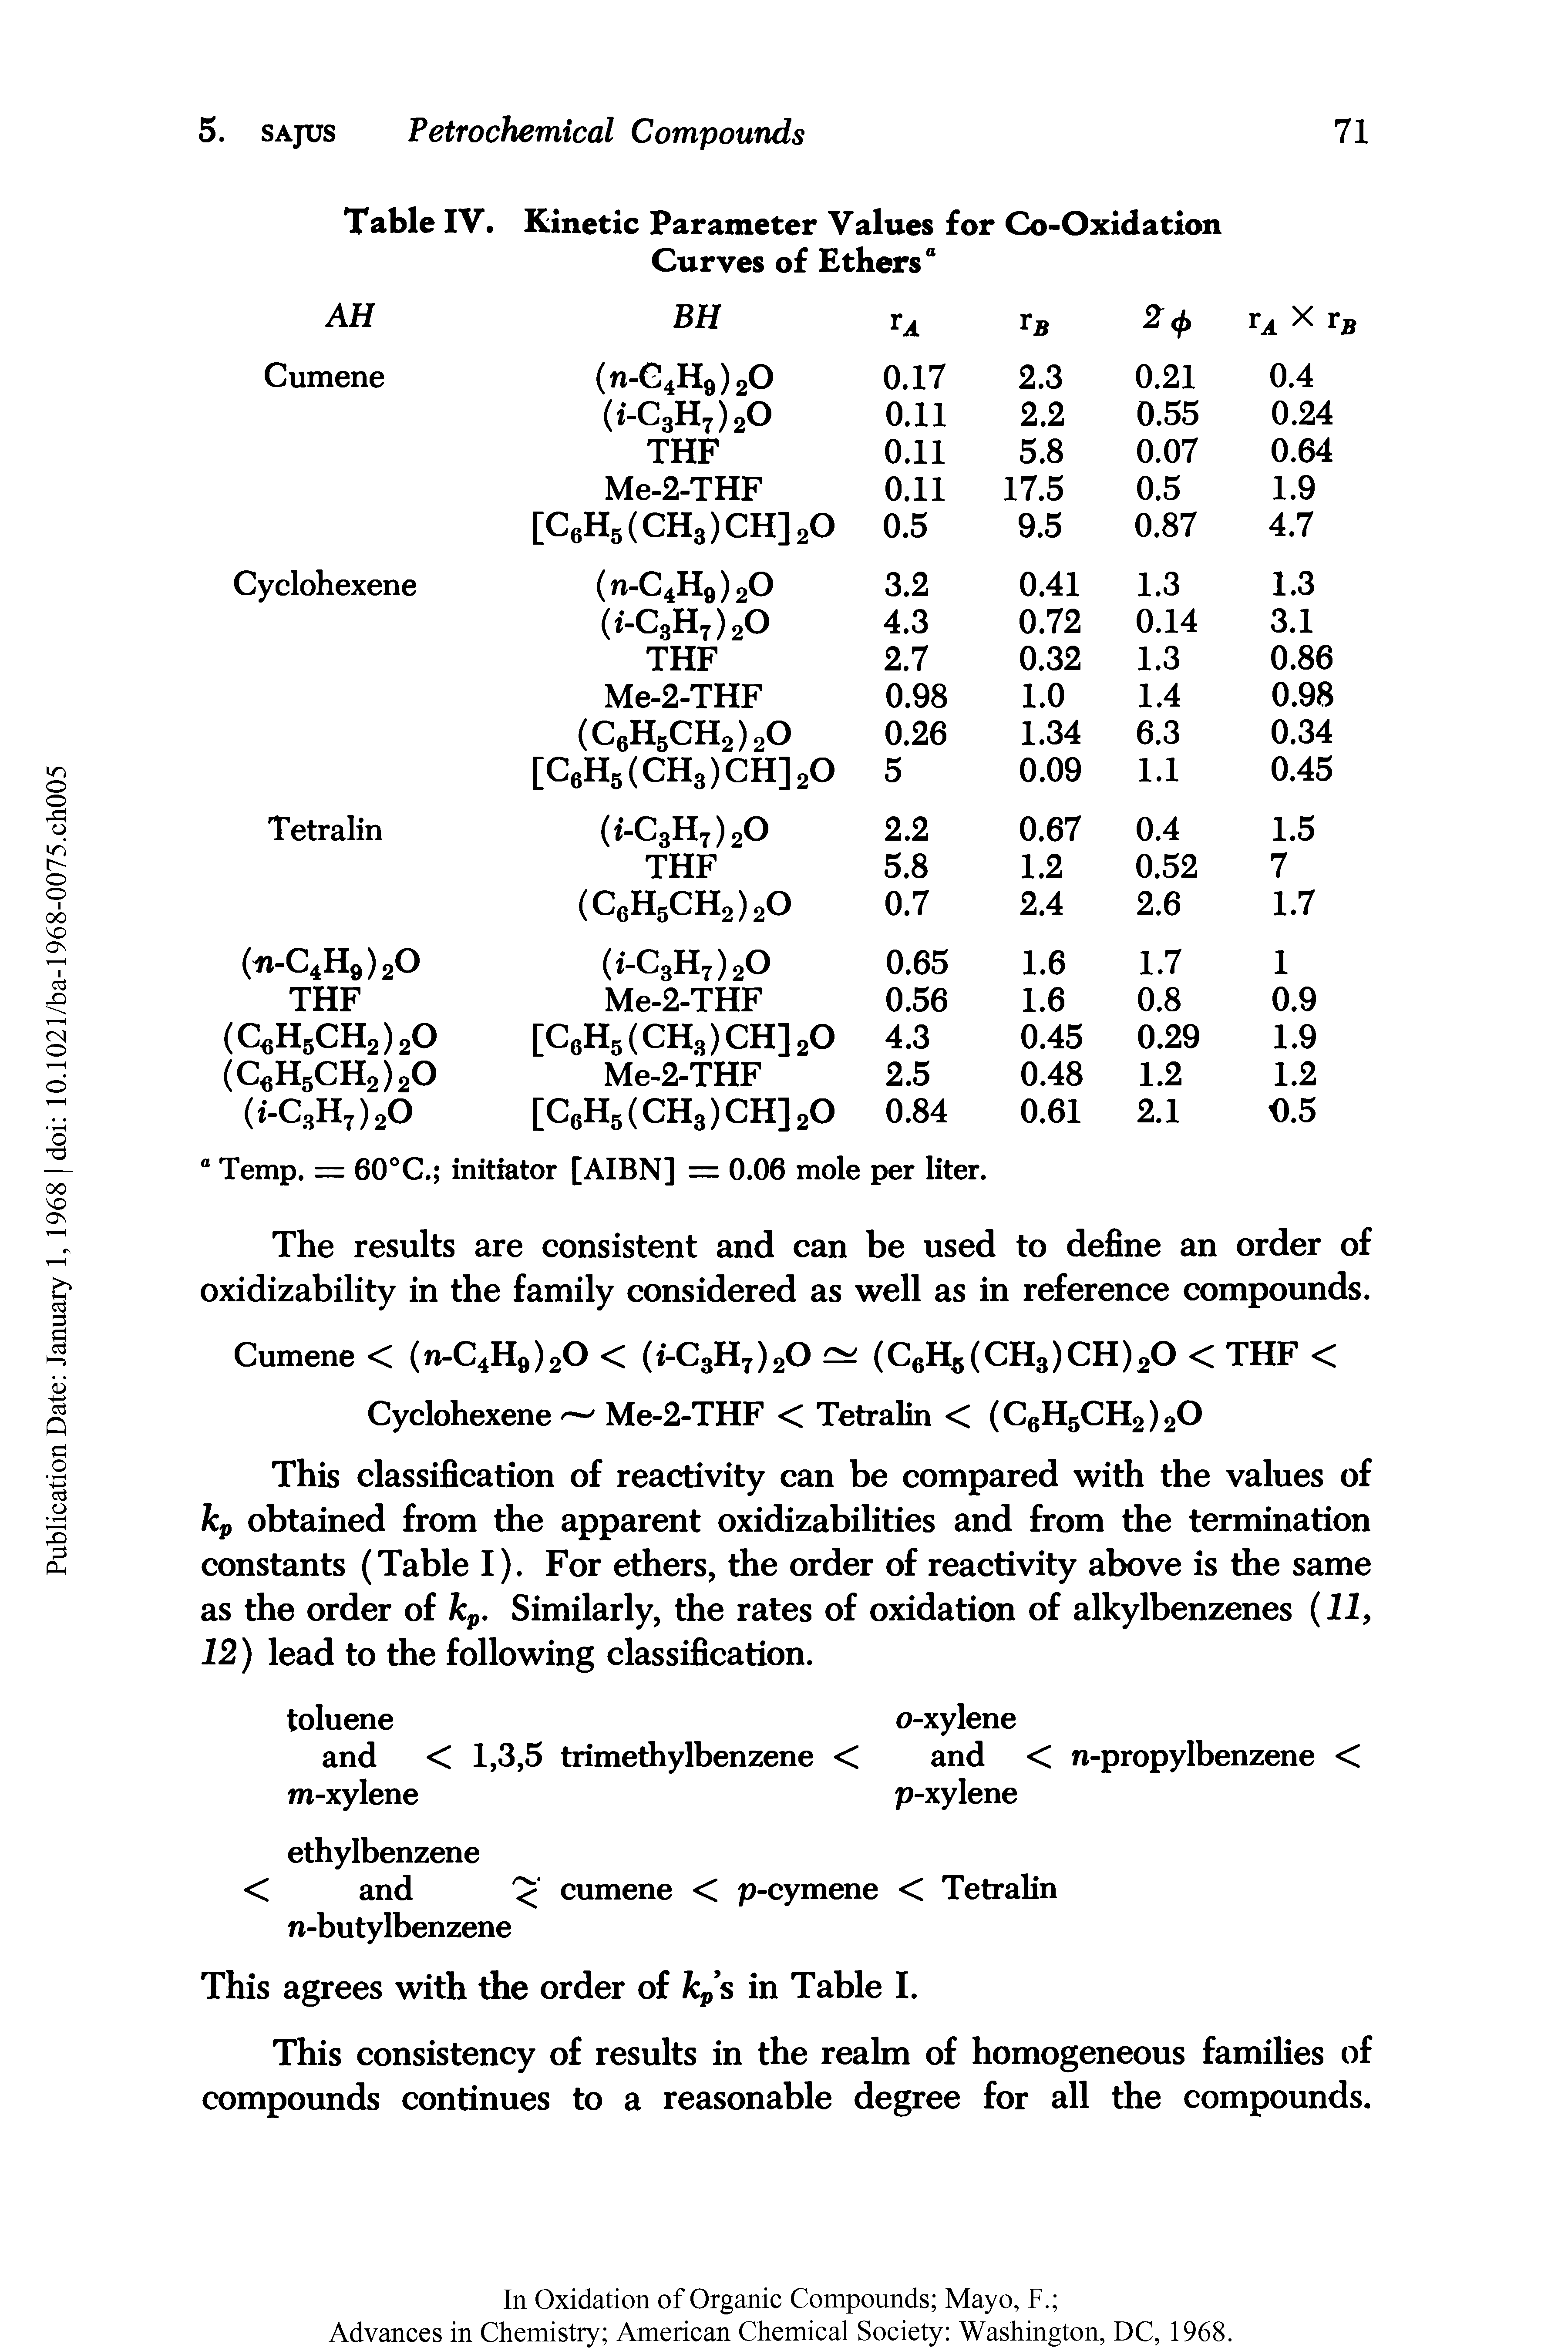 Table IV. Kinetic Parameter Values for Co-Oxidation Curves of Ethers0...